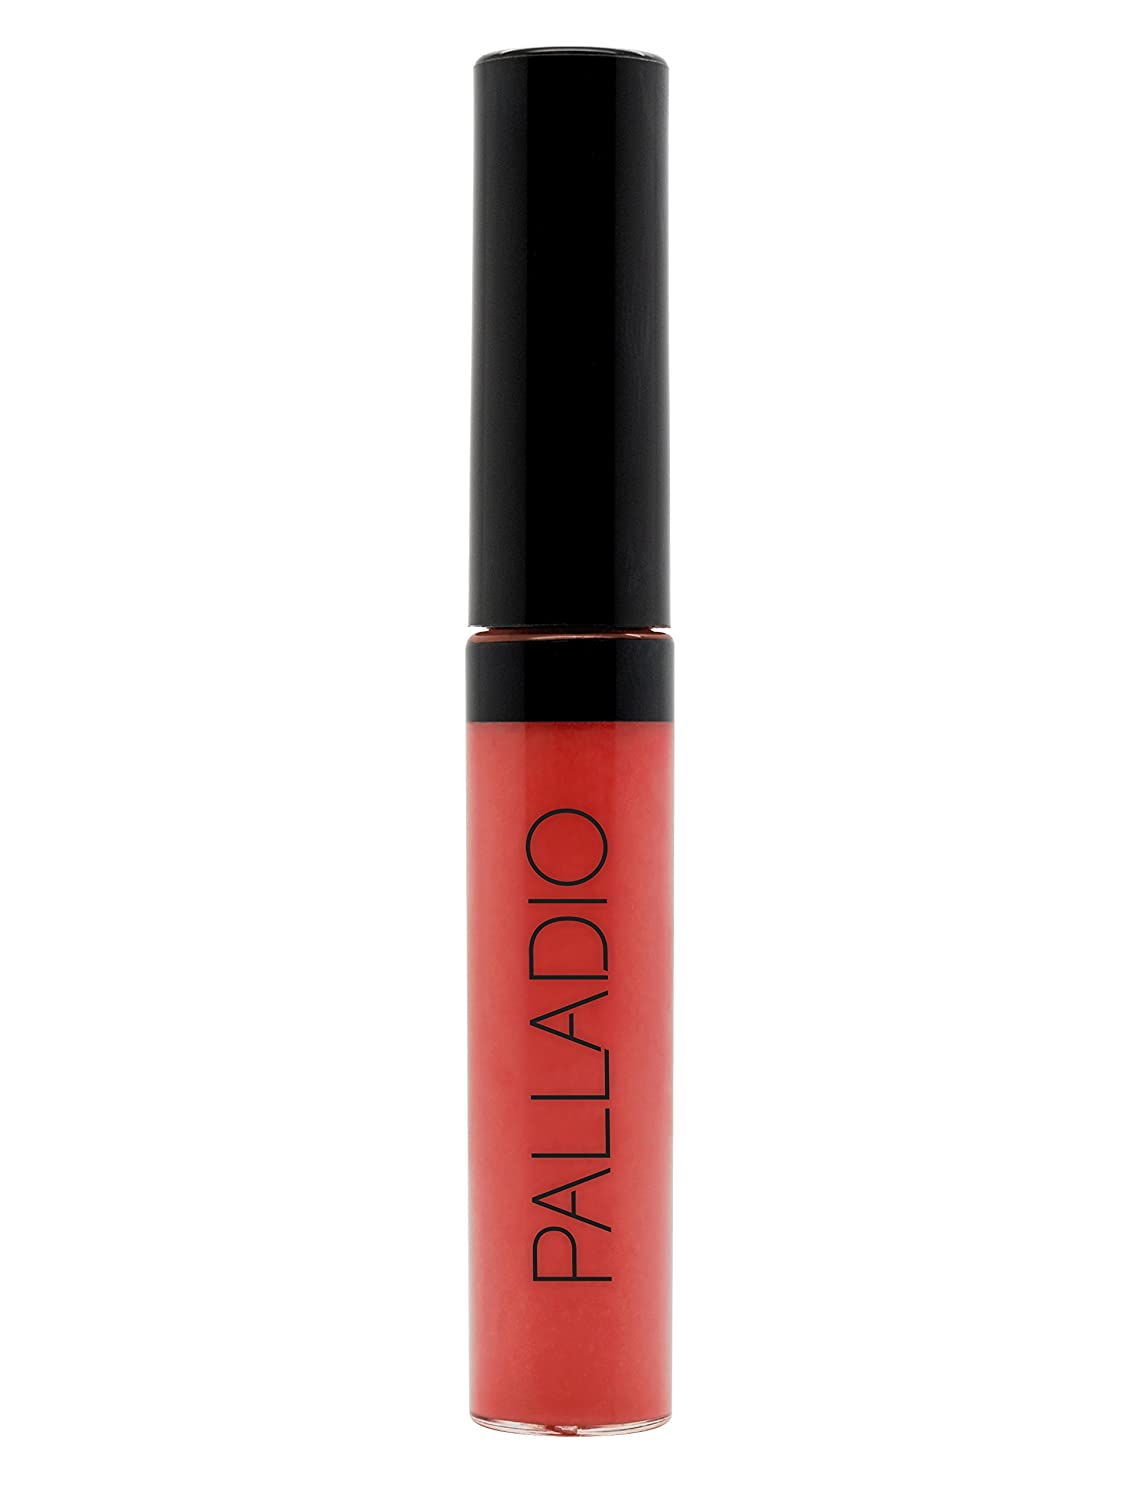 Palladio Lip Gloss, Pure Natural, Non-Sticky Lip Gloss, Contains Vitamin E and Aloe, Offers Intense Color and Moisturization, Minimizes Lip Wrinkles, Softens Lips with Beautiful Shiny Finish. Cruelty Free.